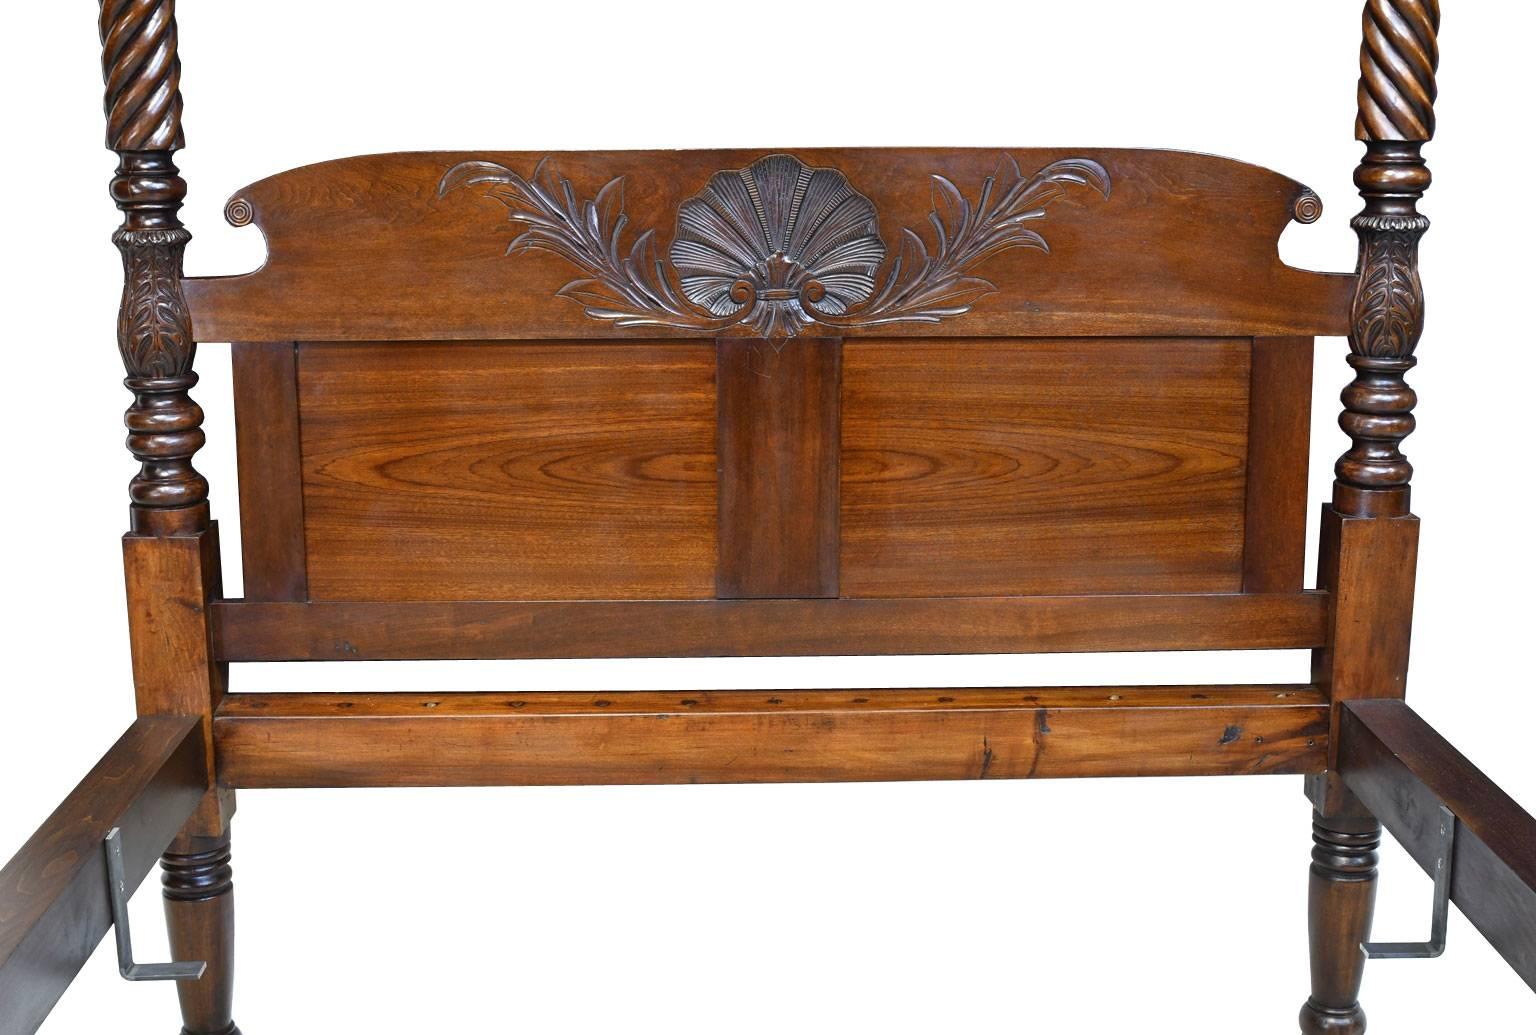 This beautiful four-poster bed from Pennsylvania, circa 1815, with twist-turned posts embellished with acanthus carvings and carved headboard, was adapted to fit a standard queen-size mattress. From a tag still on the bed, it appears the bed was